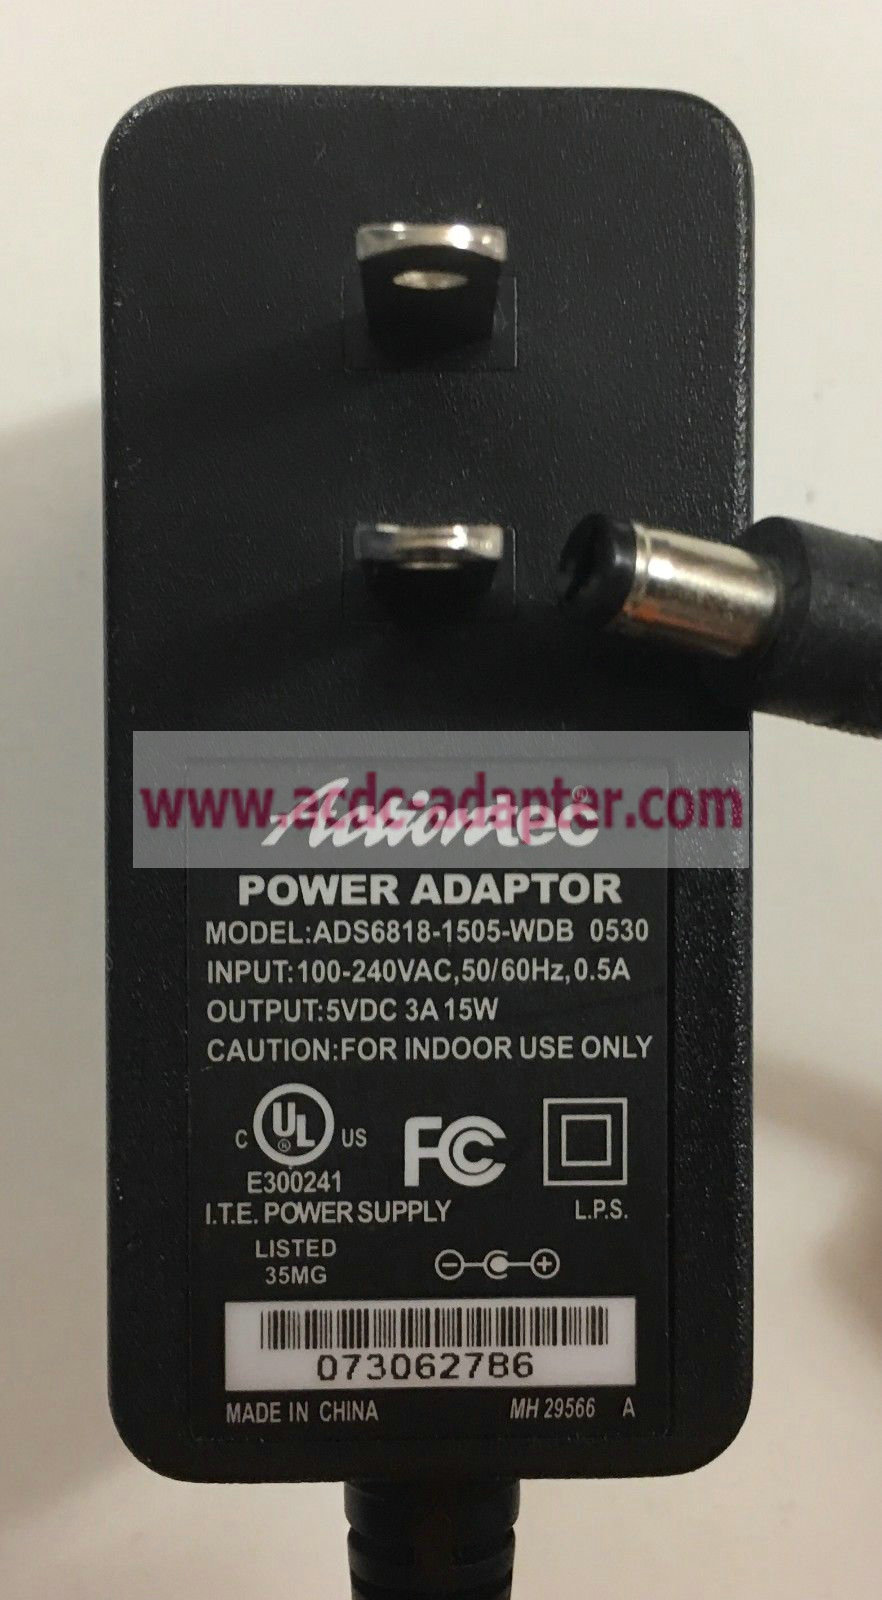 Brand new Actiontec 5VDC 3A 15W ADS6818-1505-WD Power Adapter for MI424WR Verizon - Click Image to Close